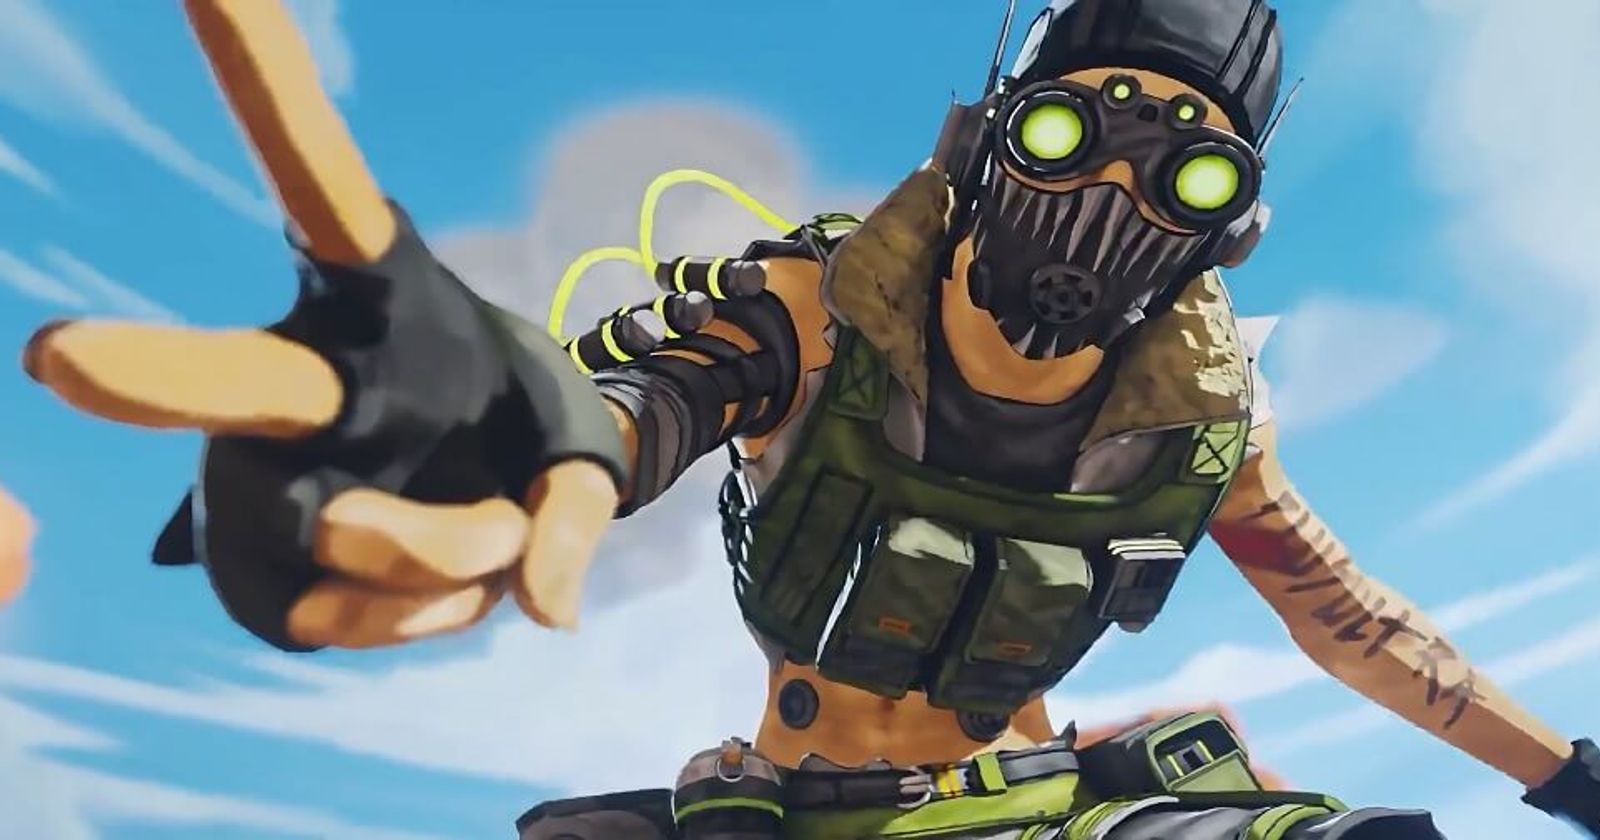 Apex Legends Mobile Launched On Android And iOS: How To Download, Required  Specs And More - News18